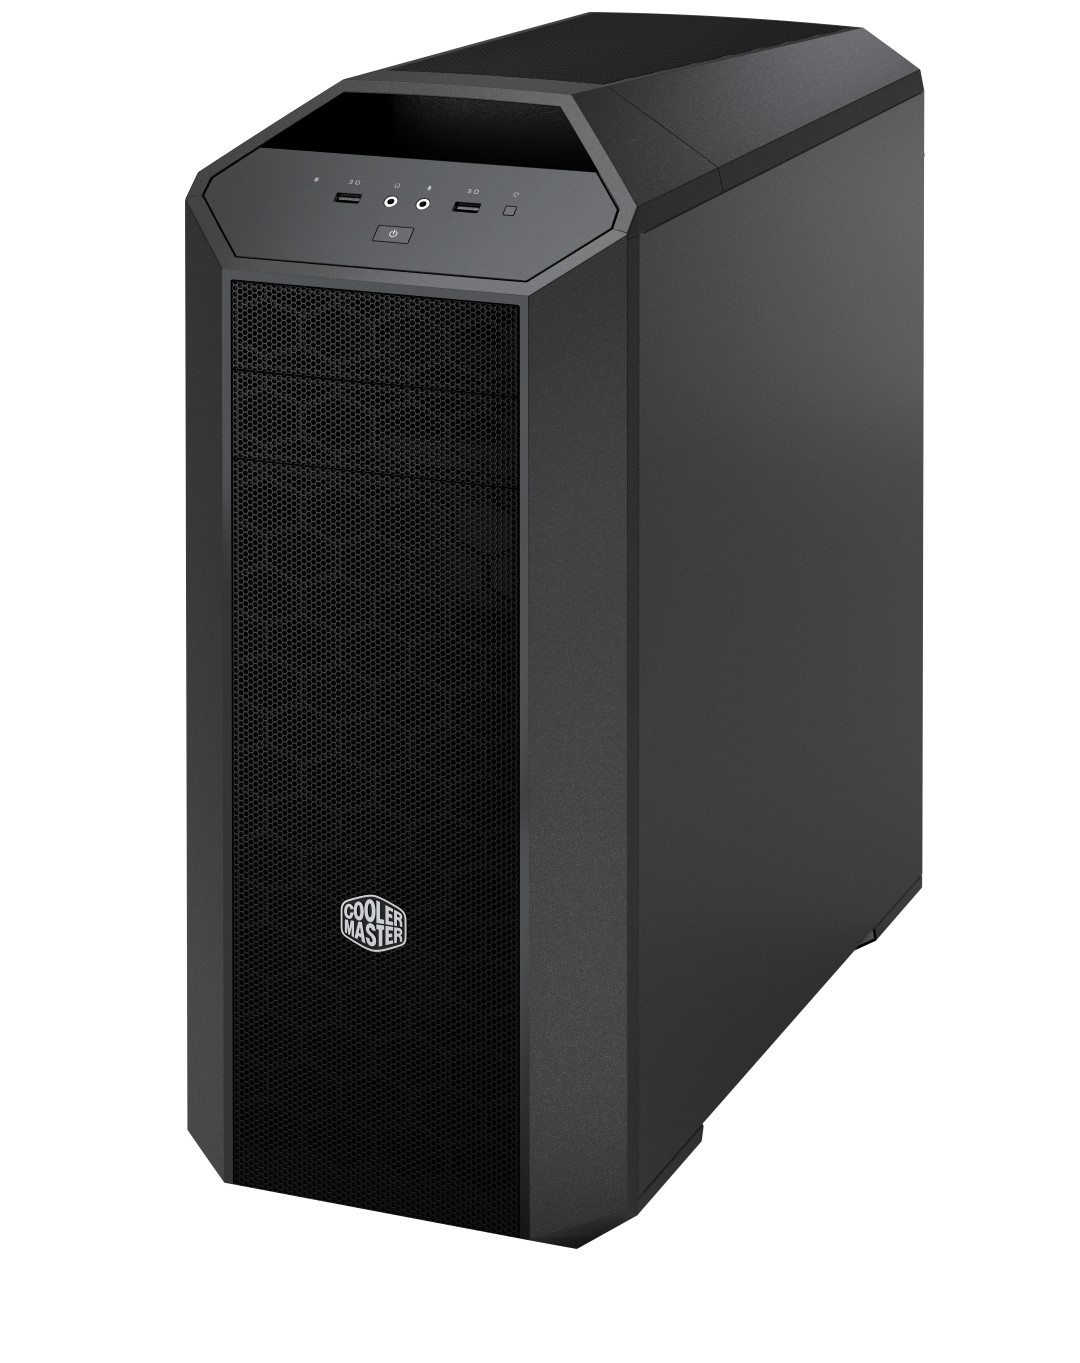 Cooler Master MasterCase 5 available on this 20th August 32